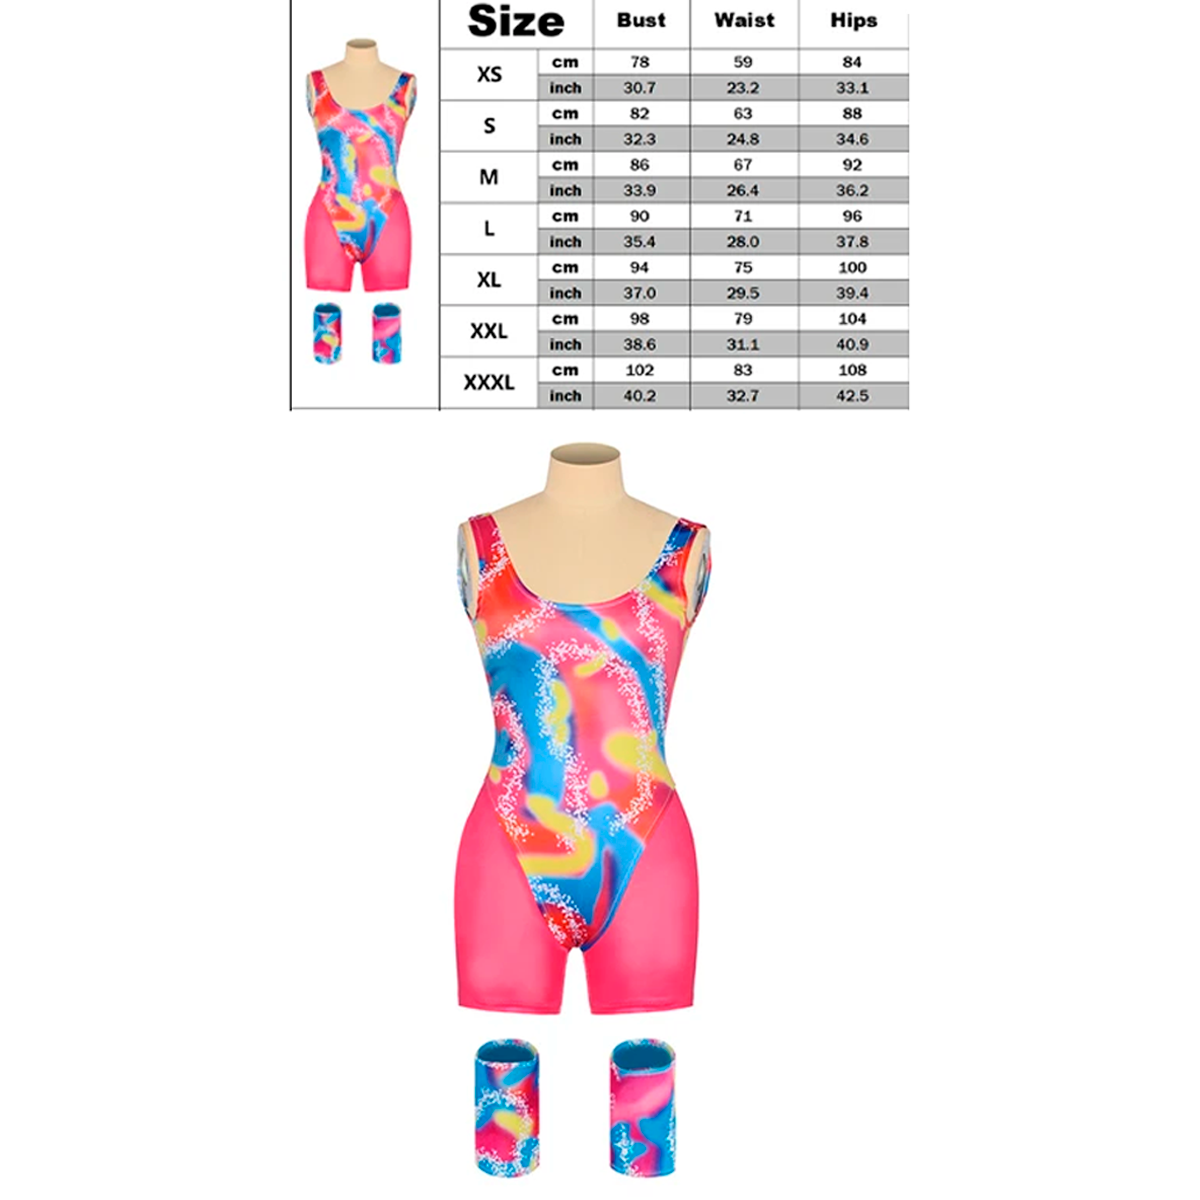 Fashion Doll's Outfit Workout Costume Rollerblade 